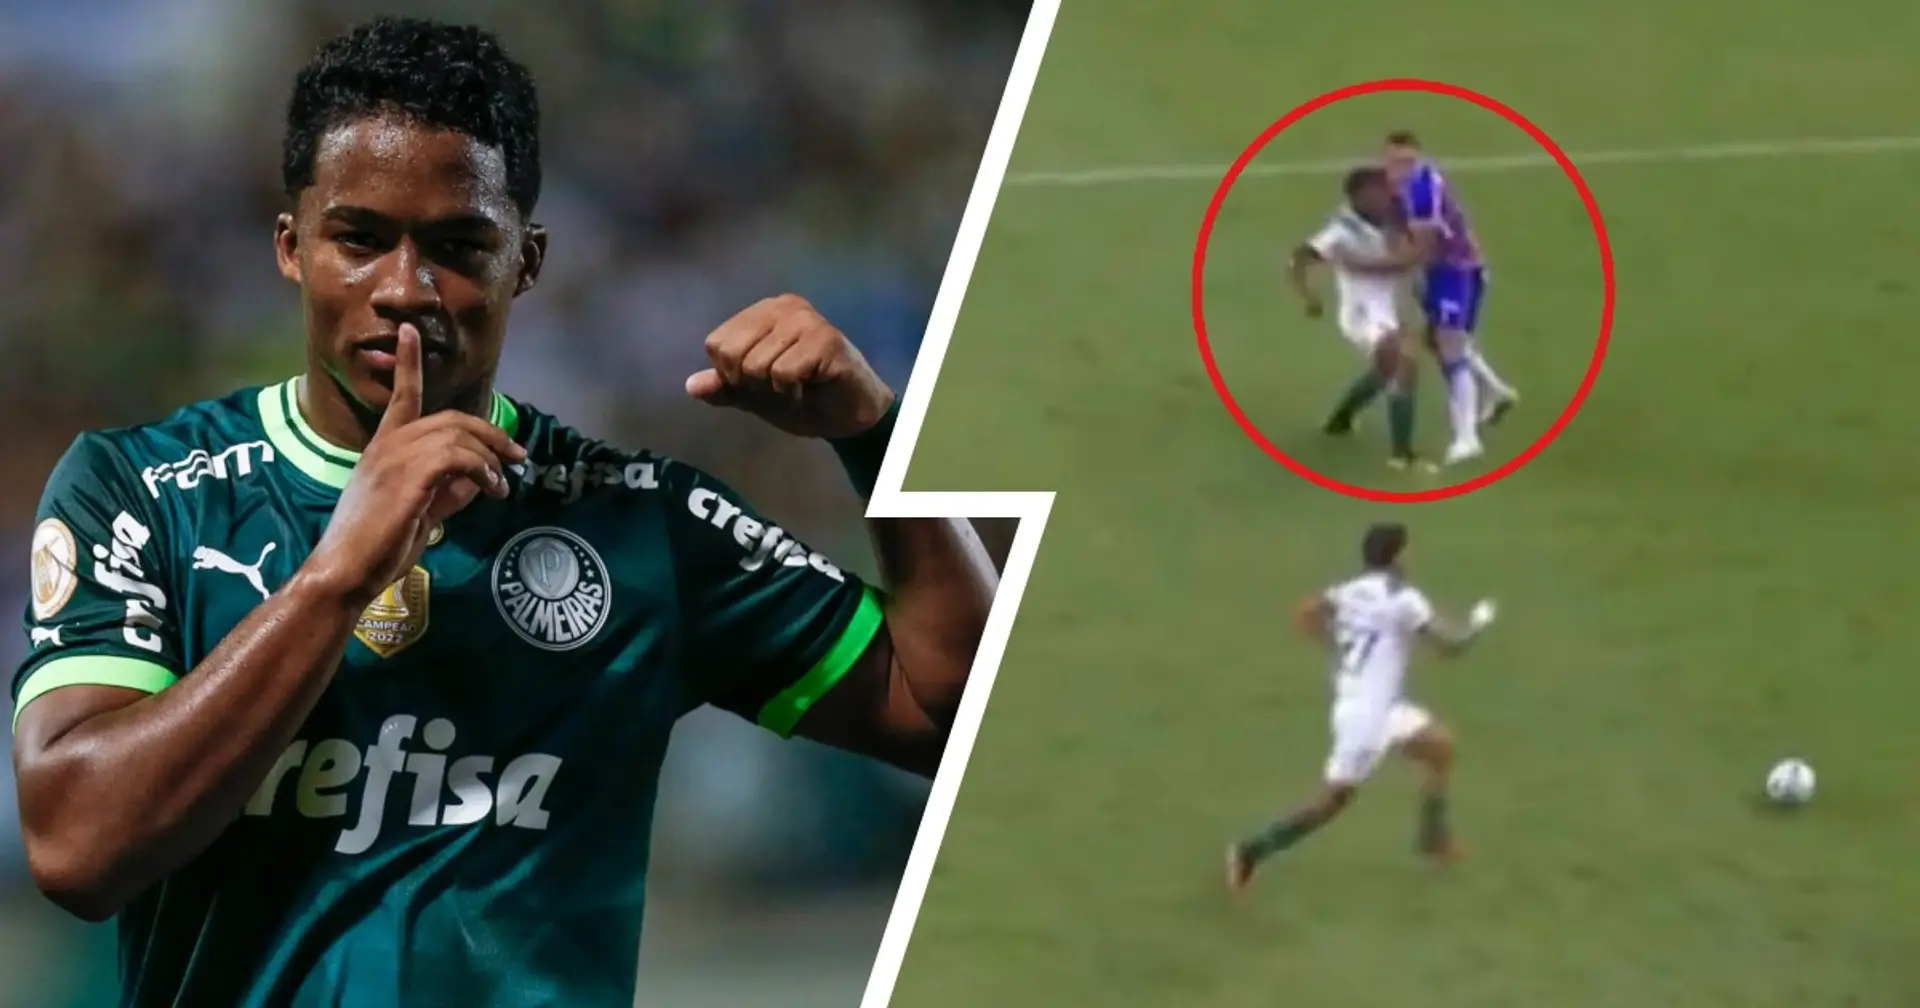 Endrick punches opponent in Palmeiras draw - next action spotted